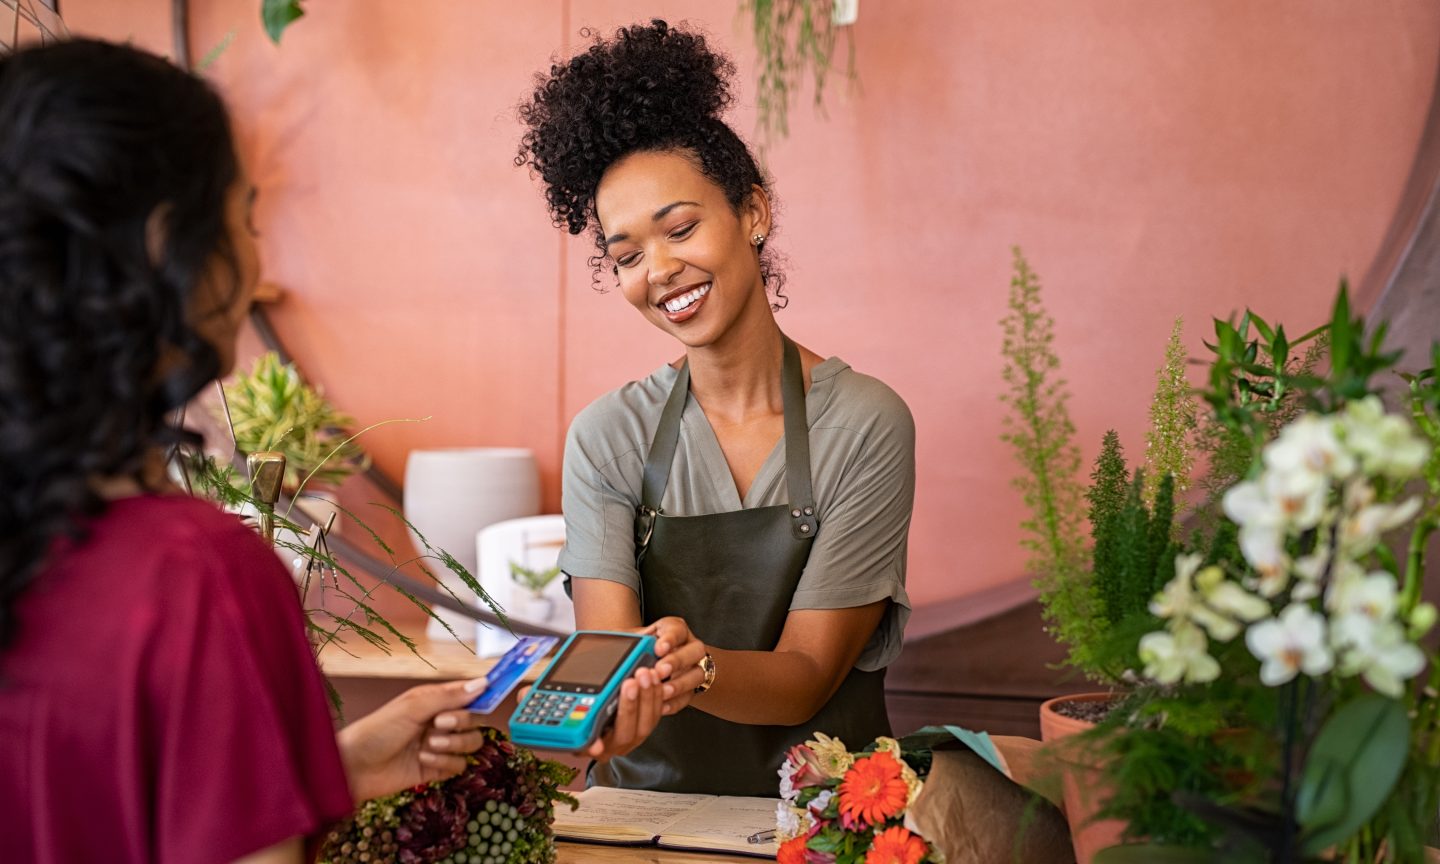 20 Free Marketing Ideas for Small Businesses – NerdWallet